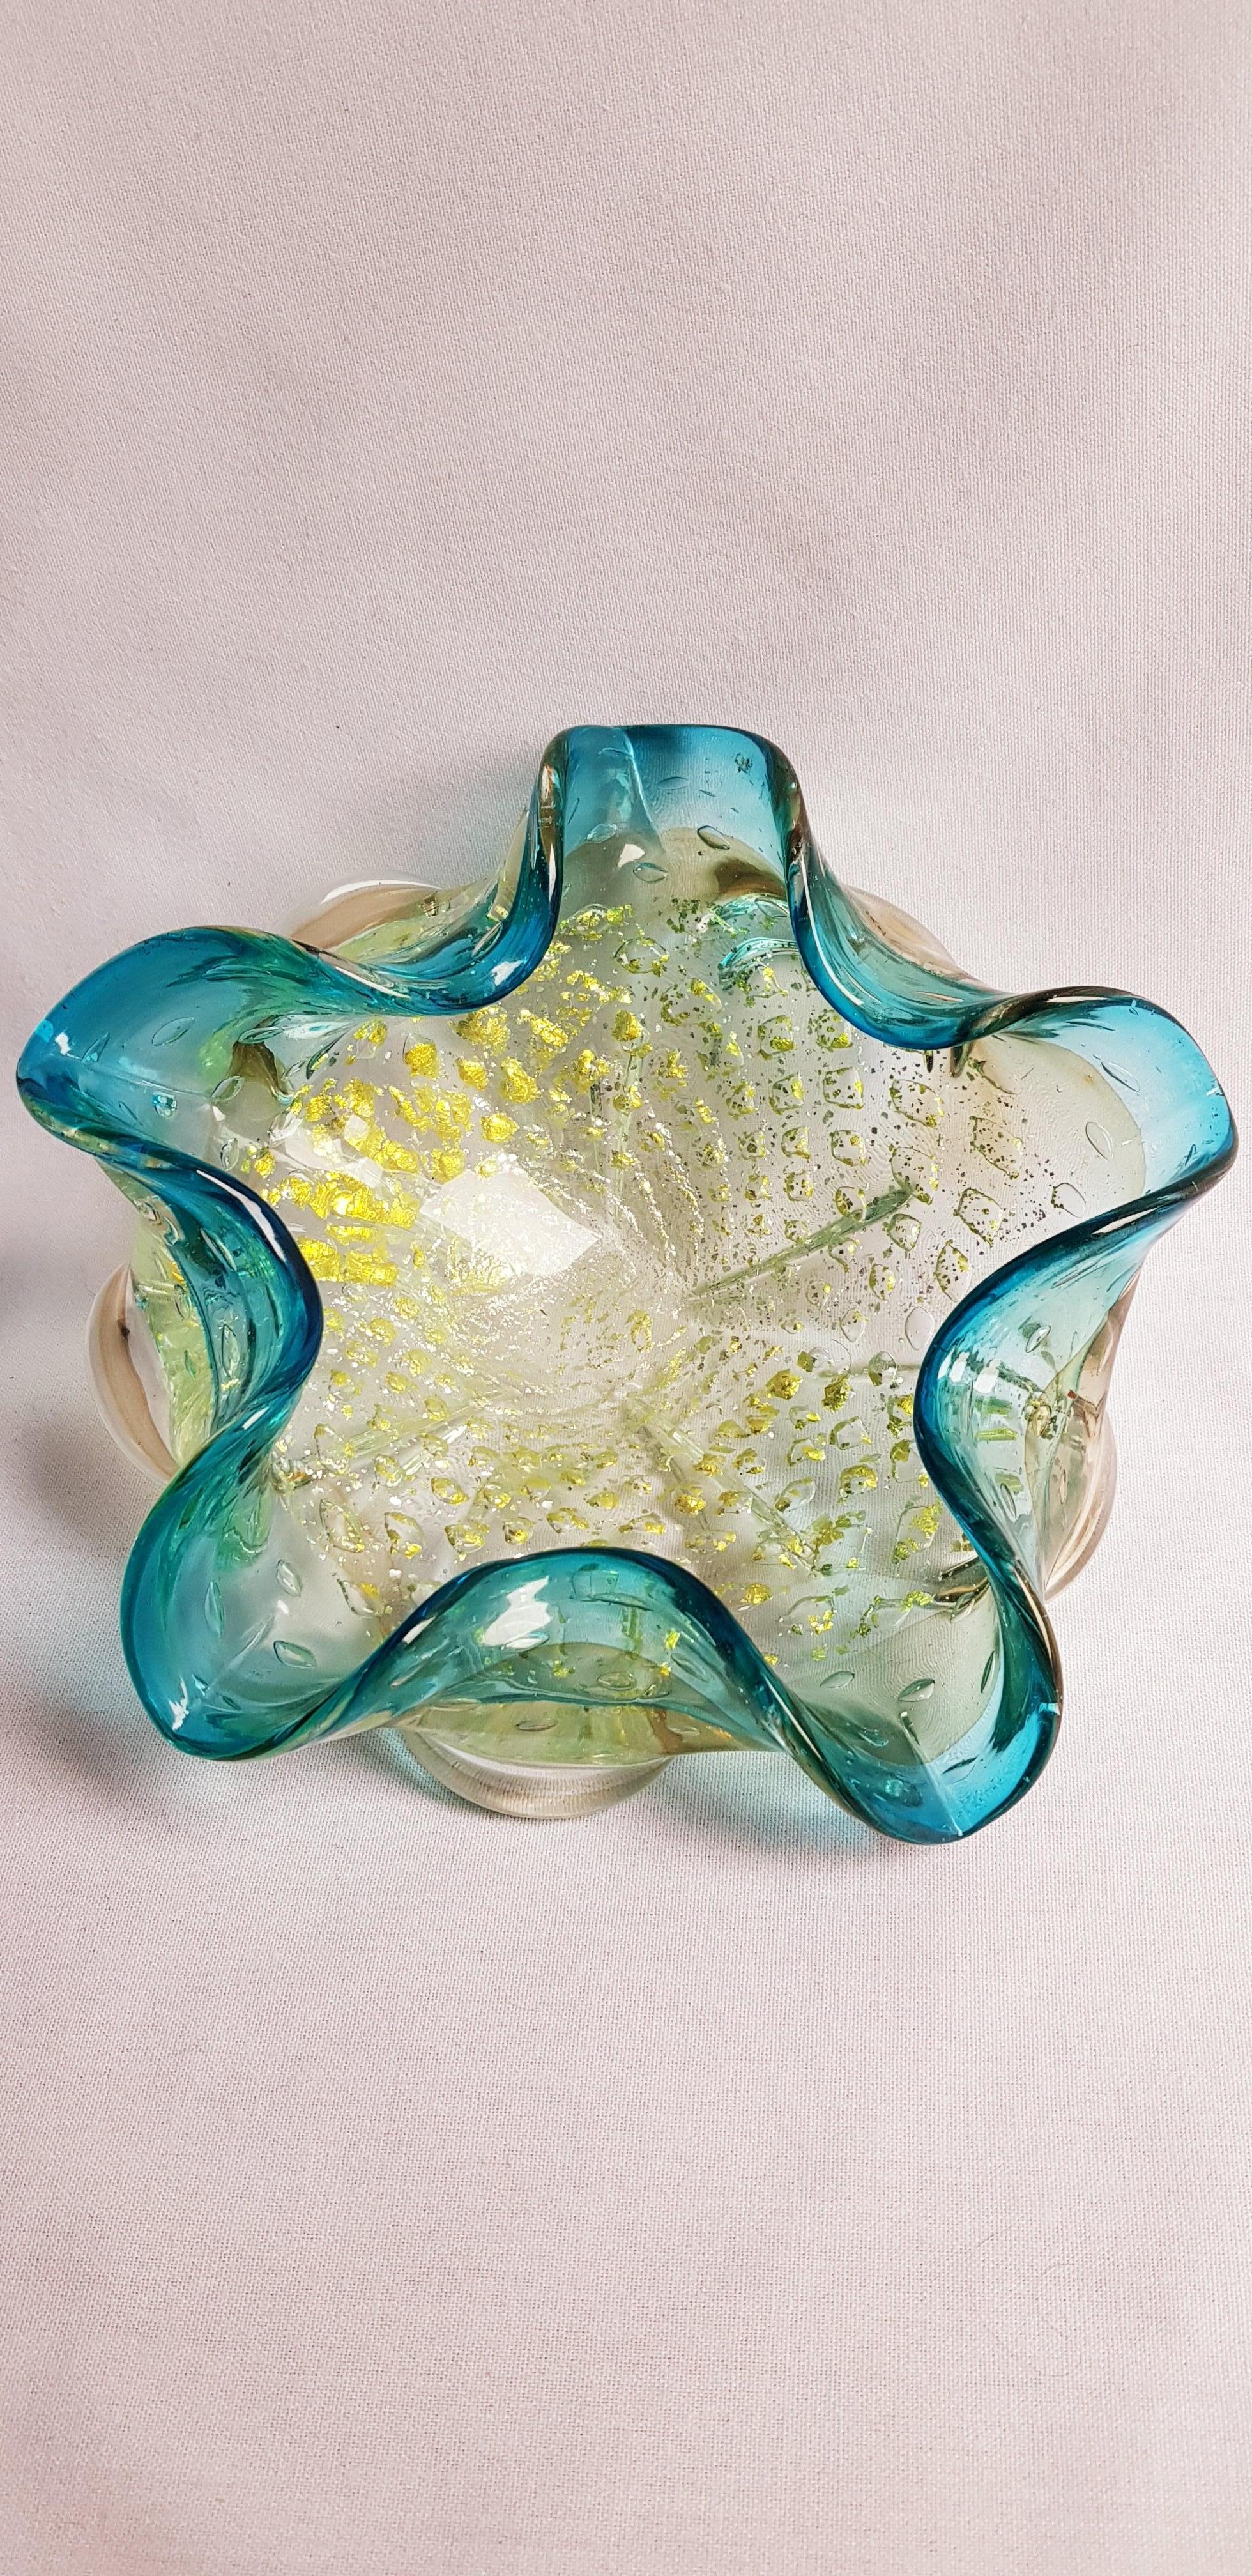 Beautiful middle of century Murano glass bowl with gold and silver leaf and controlled bubbles by Frateli Toso brilliant condition.